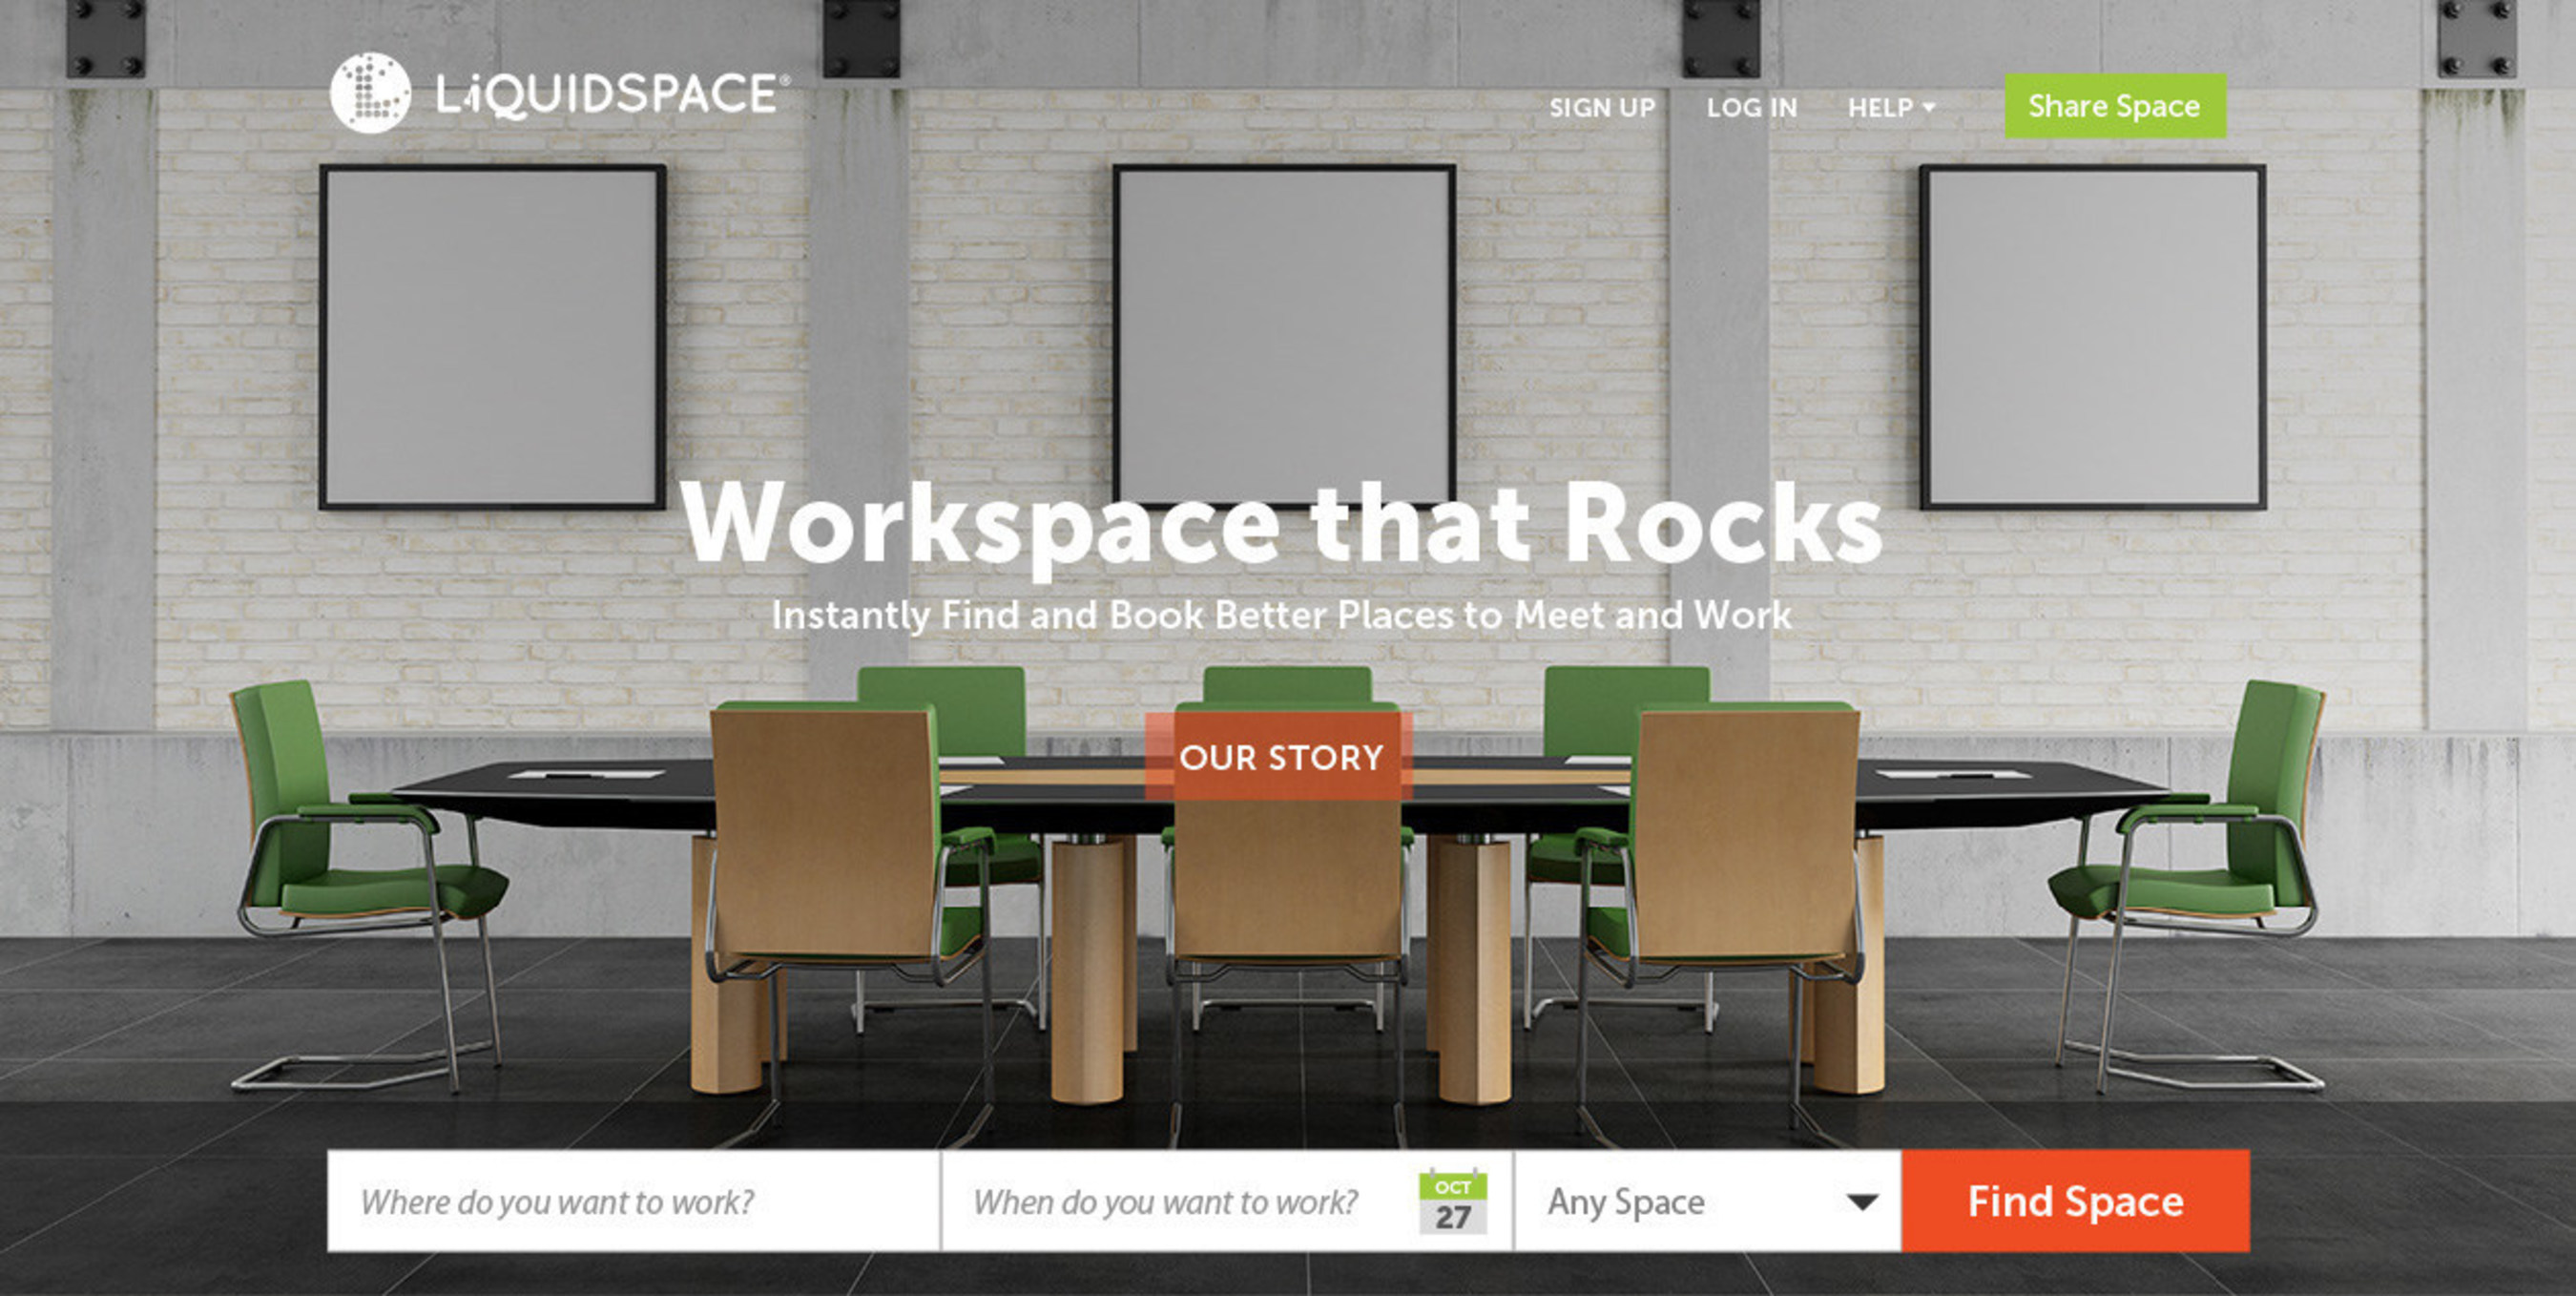 LiquidSpace, the largest real-time marketplace of professional workspace, secures $14 million in additional funding.